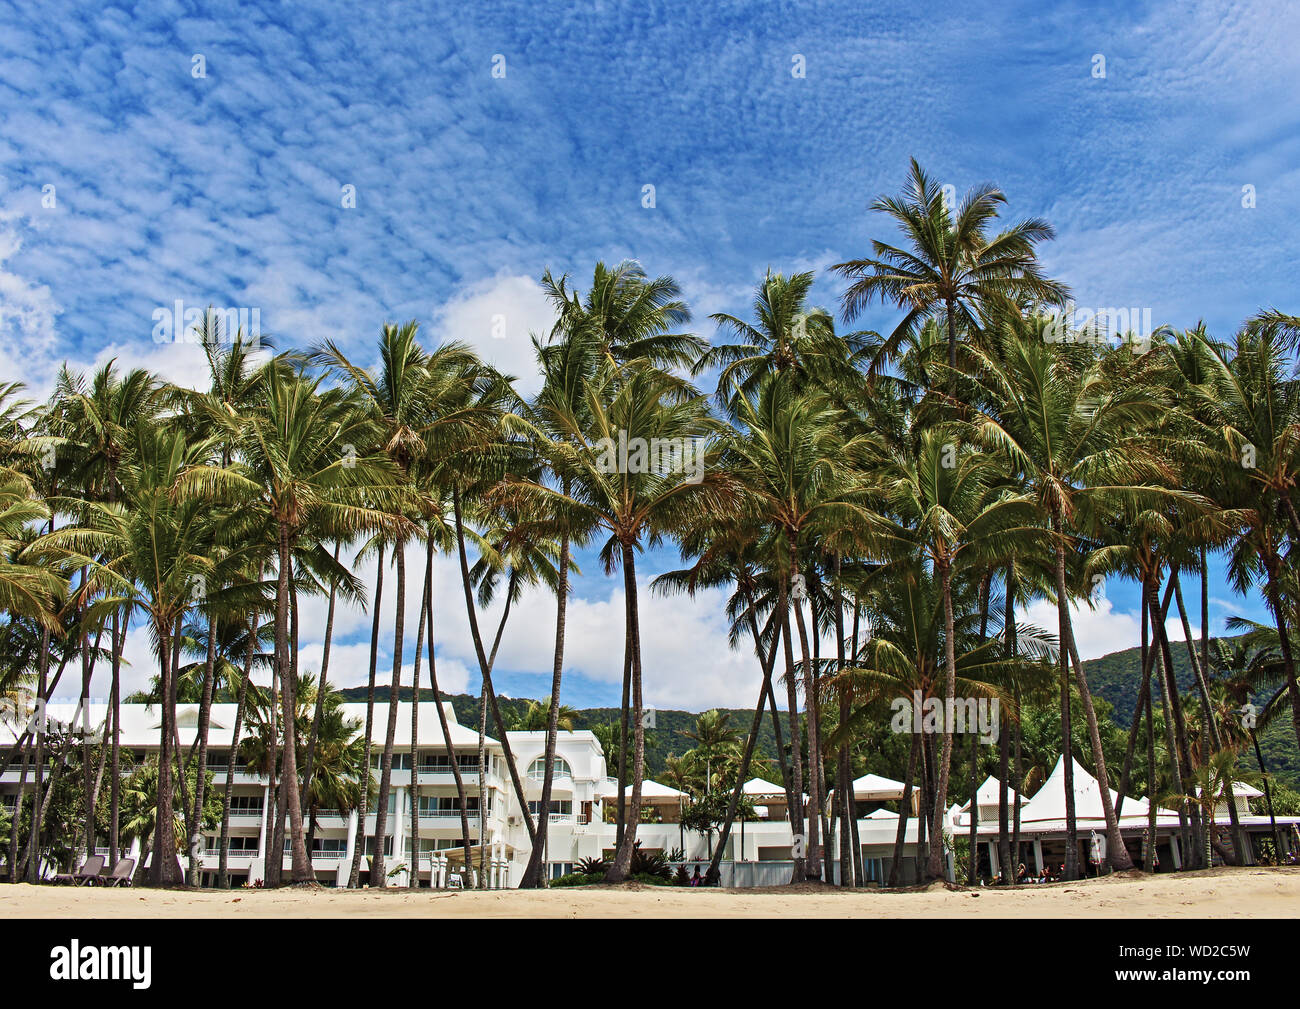 Palm Cove beach resort hotels, restaurants, palm trees, blue painted skies. Stock Photo